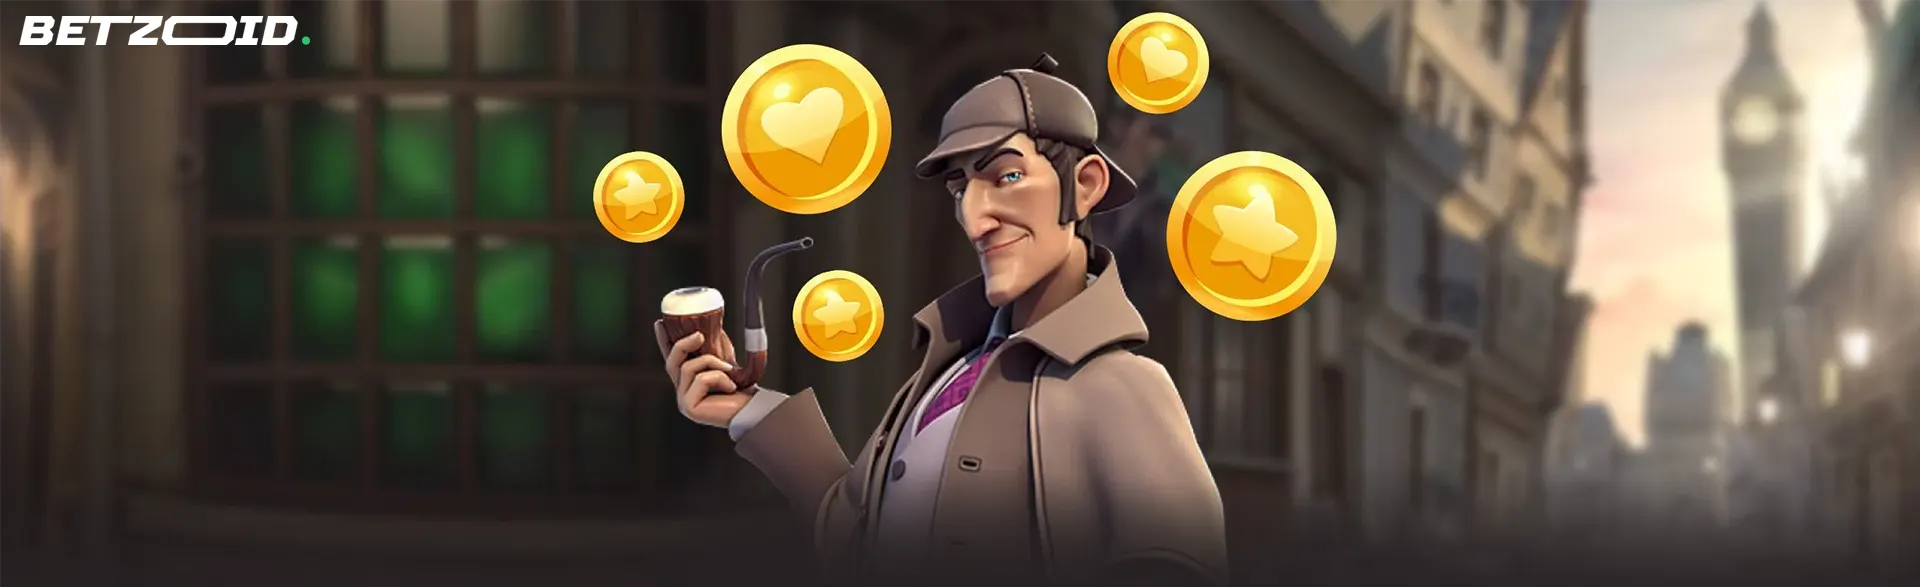 Illustration of a detective character holding a pipe, surrounded by golden coins with hearts and stars, representing online casino cashback offers in Canada.